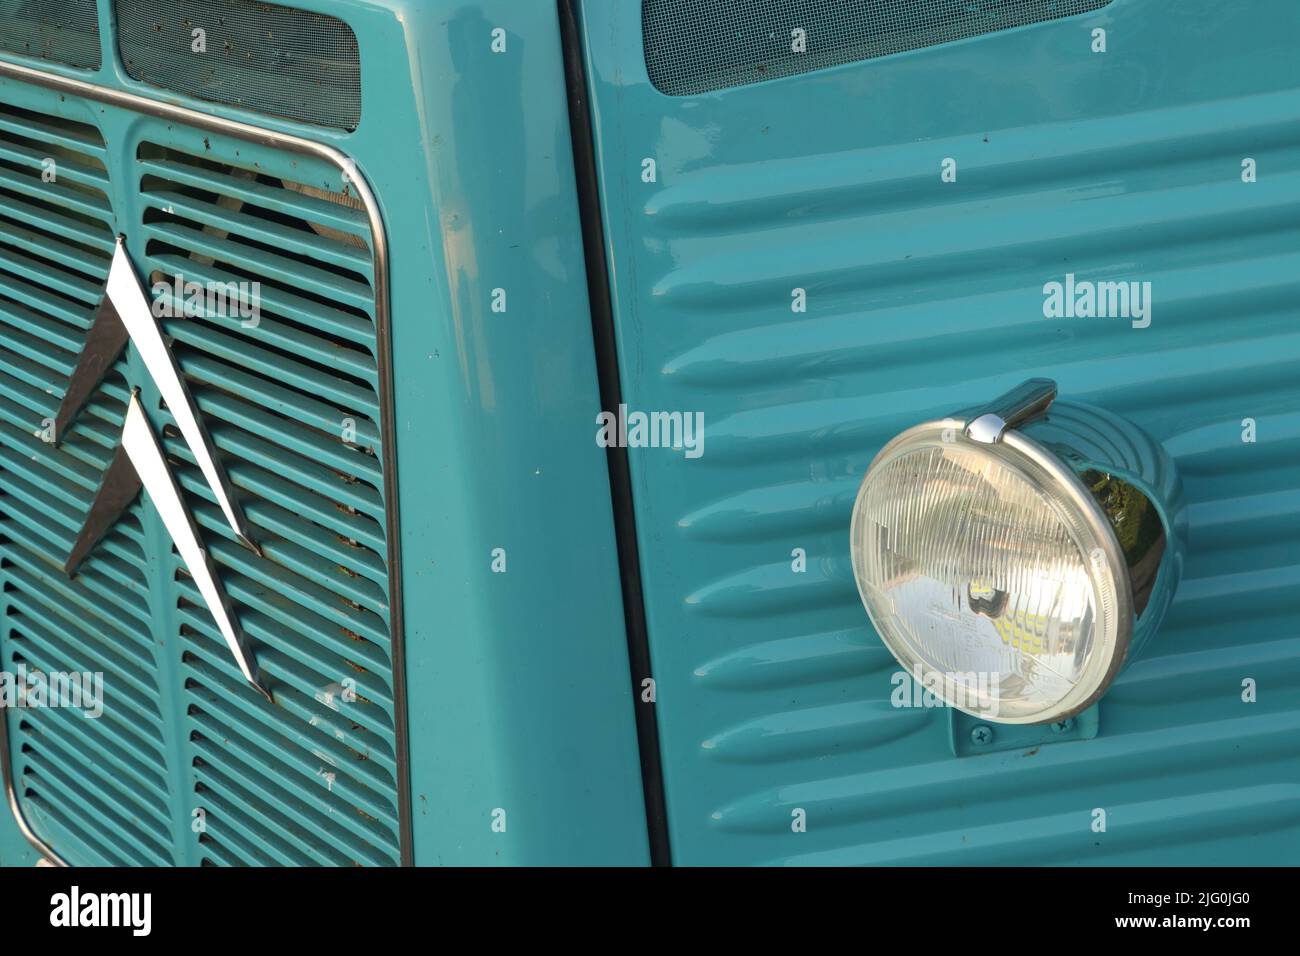 headlight and logo on front of blue Citroën HY van Stock Photo